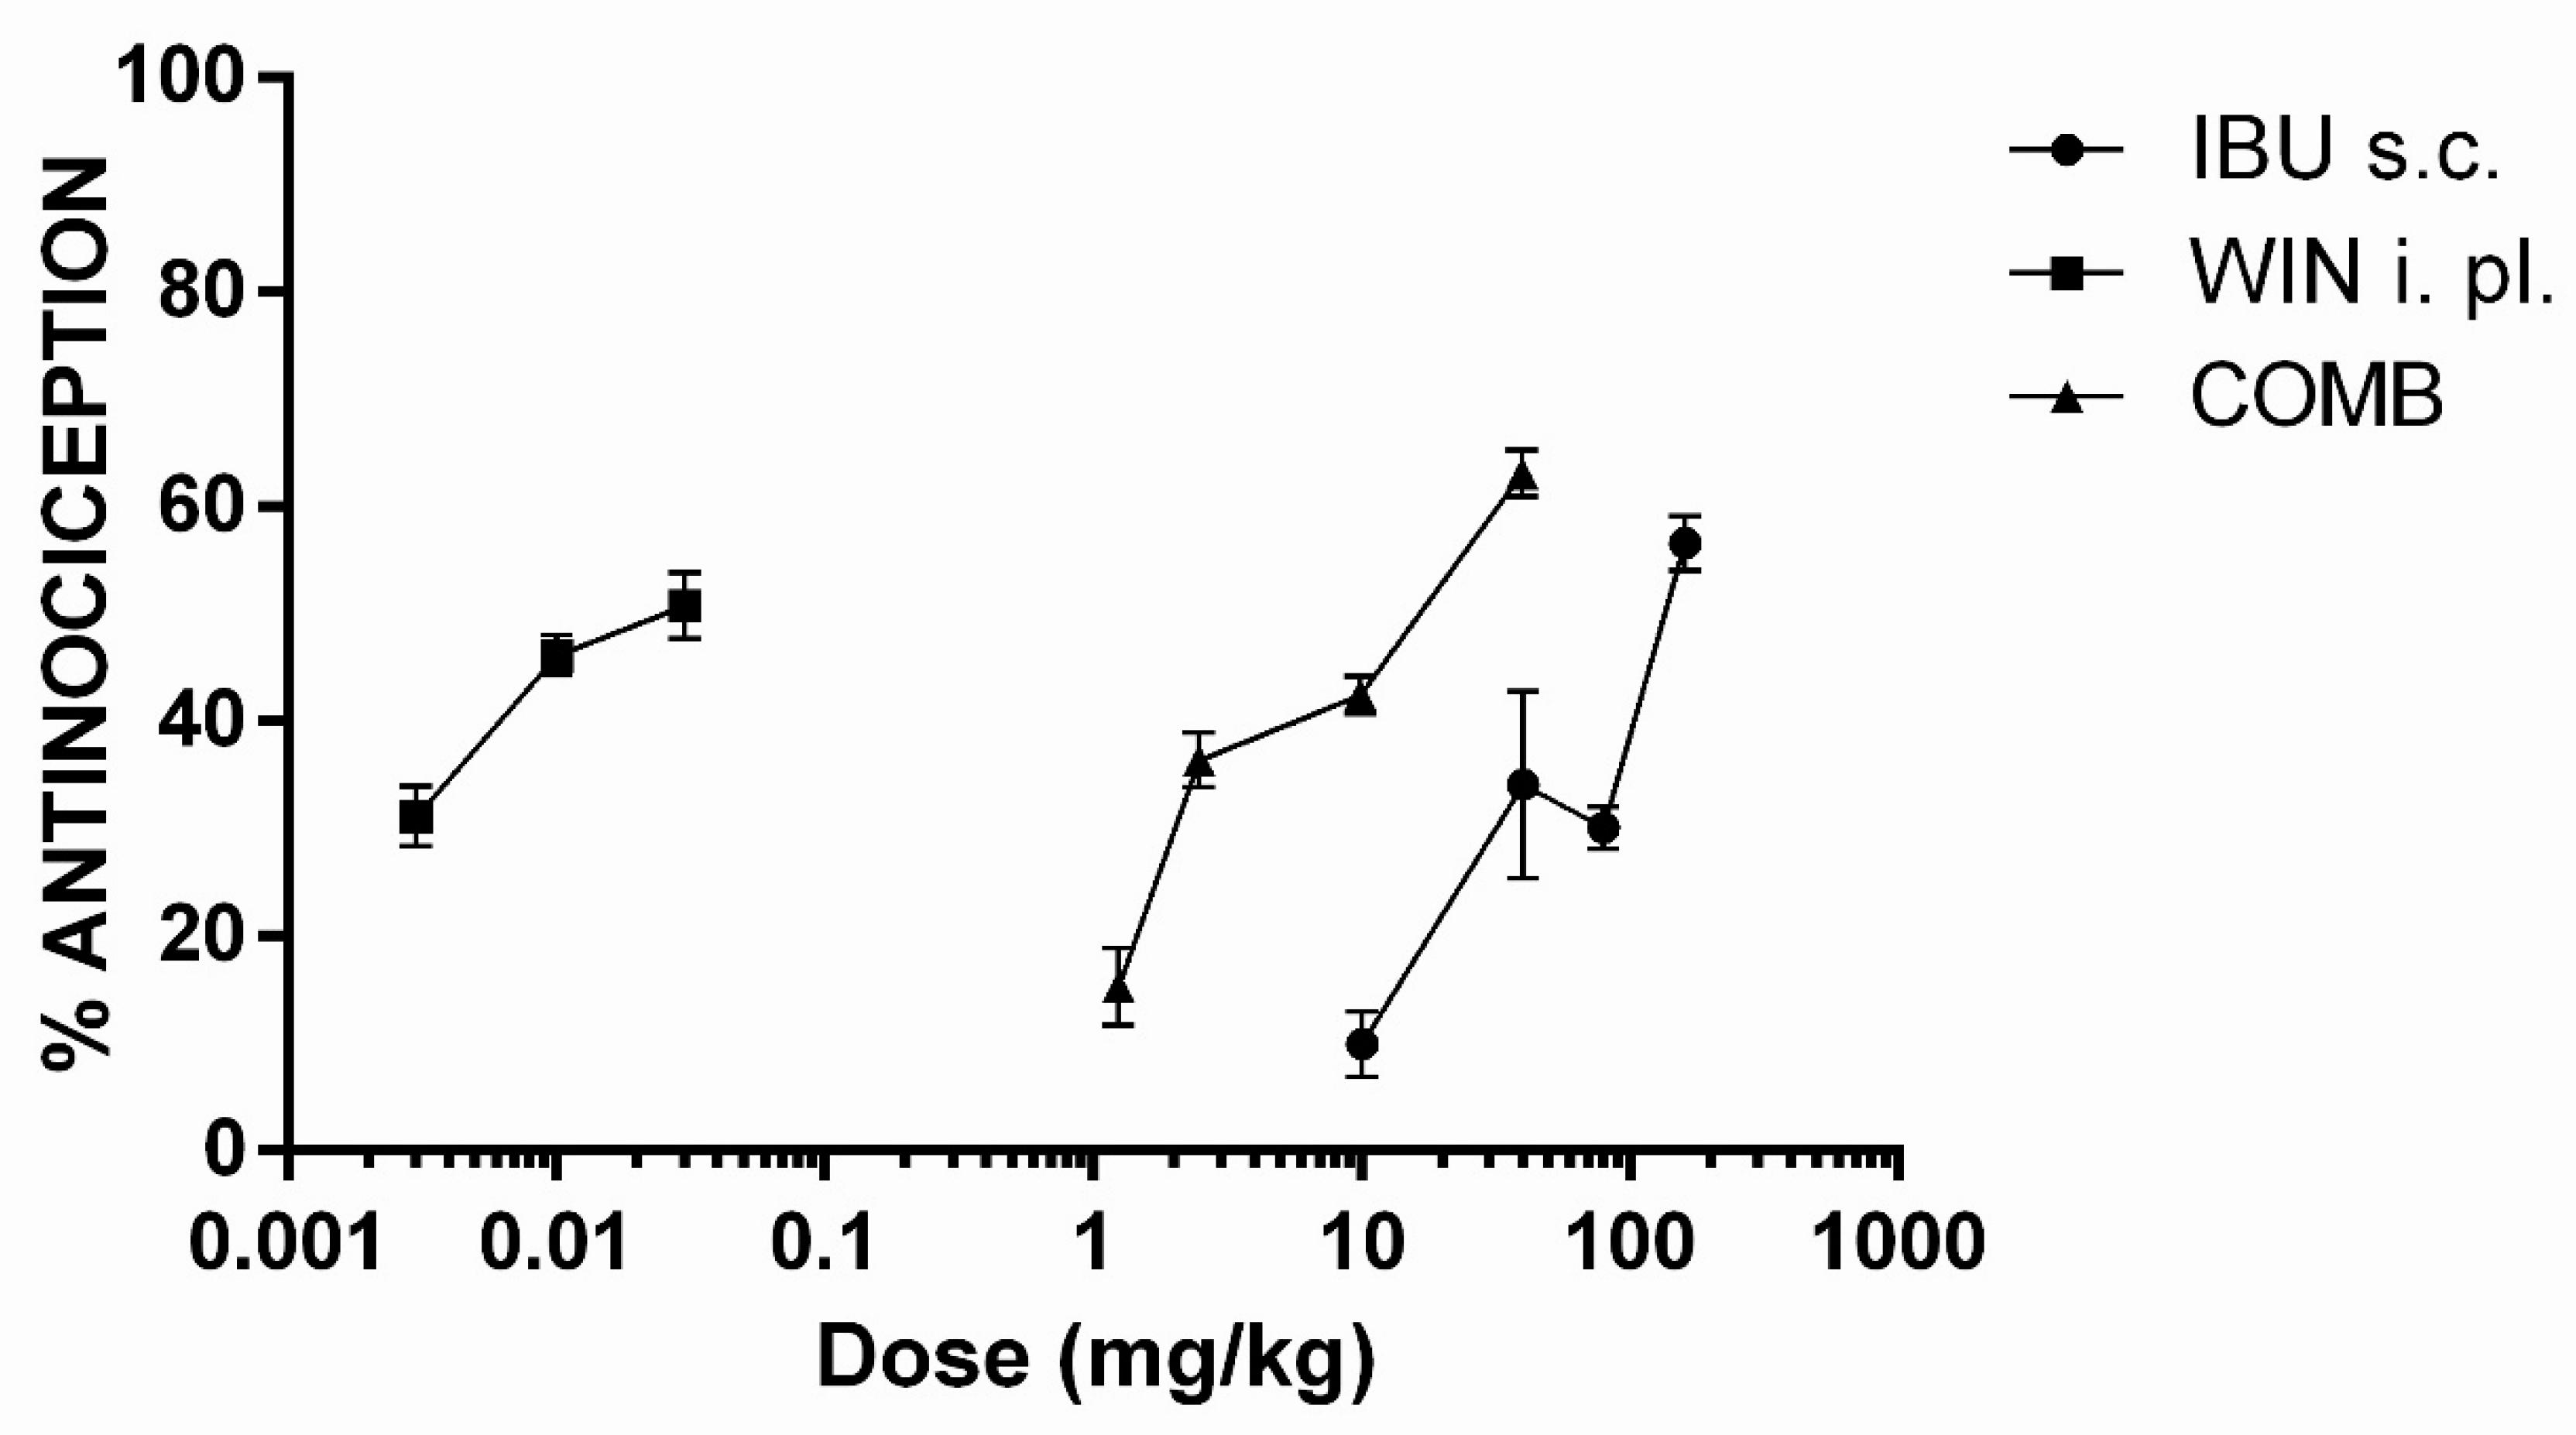 The graph shows the effect of different doses of ibuprofen (IBU), win (WIN) and a combination of both (COMB) on antinociception.